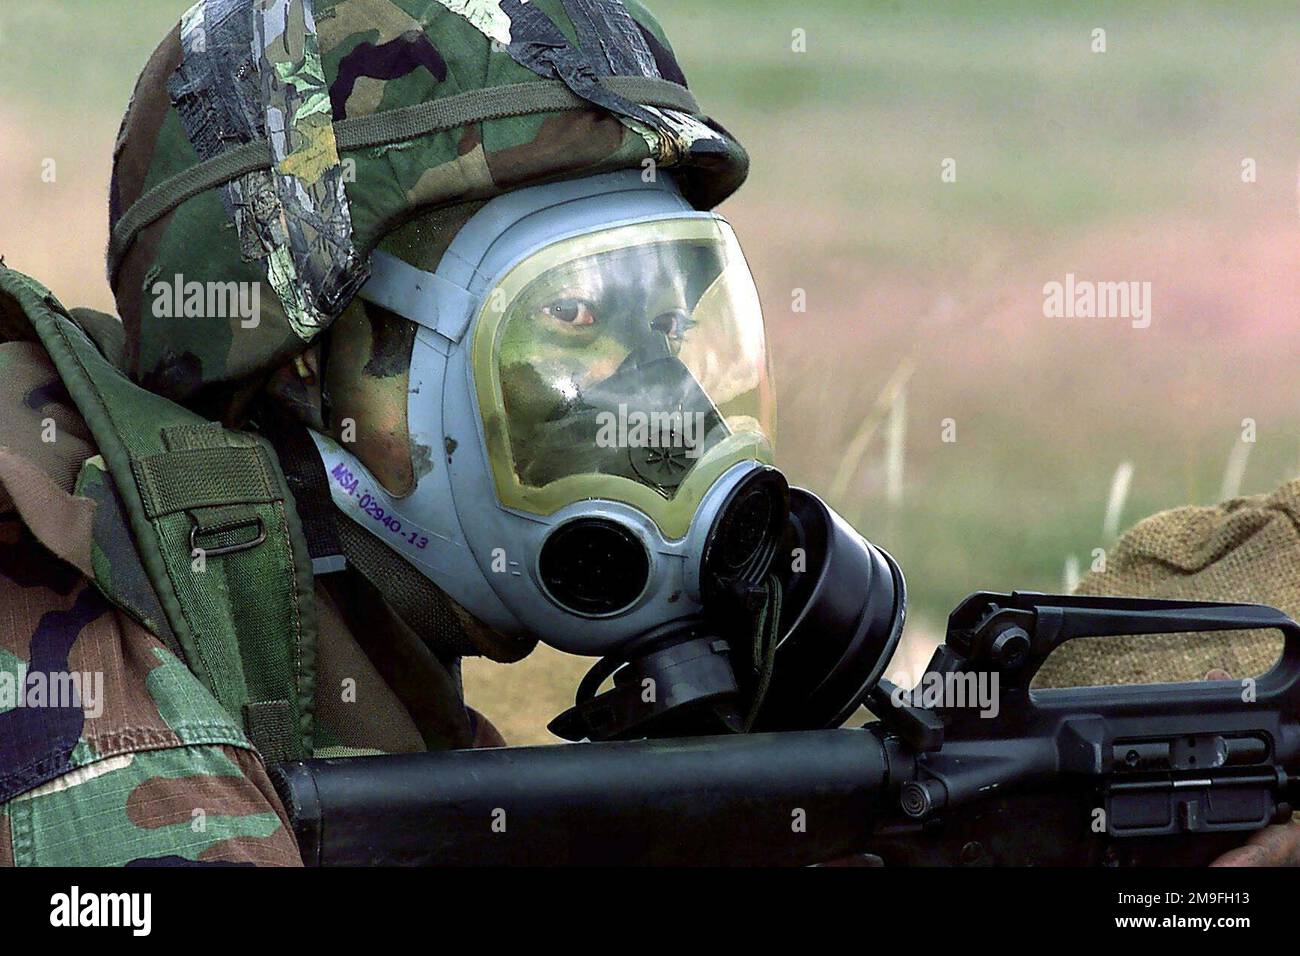 US Air Force Captain Steve Sugiyama, team leader and rifleman from the 11th Wing, dons gas mask during a simulated chemical attack in the Combat Weapons phase of DEFENDER CHALLENGE 2000 at Lackland Air Force Base, Texas. Defender Challenge is the annual Air Force wide competition sponsored by Air Force Security Forces. This competition showcases the talents and capabilities of 13 international Security Forces teams in 7 physical fitness, base defense, and policing skills over six days. Subject Operation/Series: DEFENDER CHALLENGE '00 Base: Lackland Air Force Base State: Texas (TX) Country: Uni Stock Photo